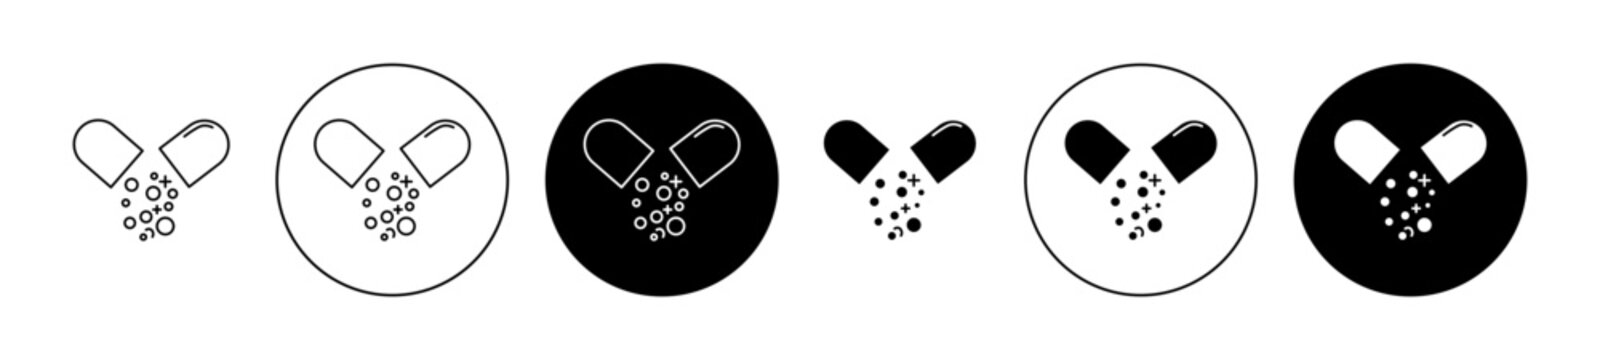 Open capsule pill icon set in black filled and outlined style. Pharmacist drug vector symbol for ui designs.